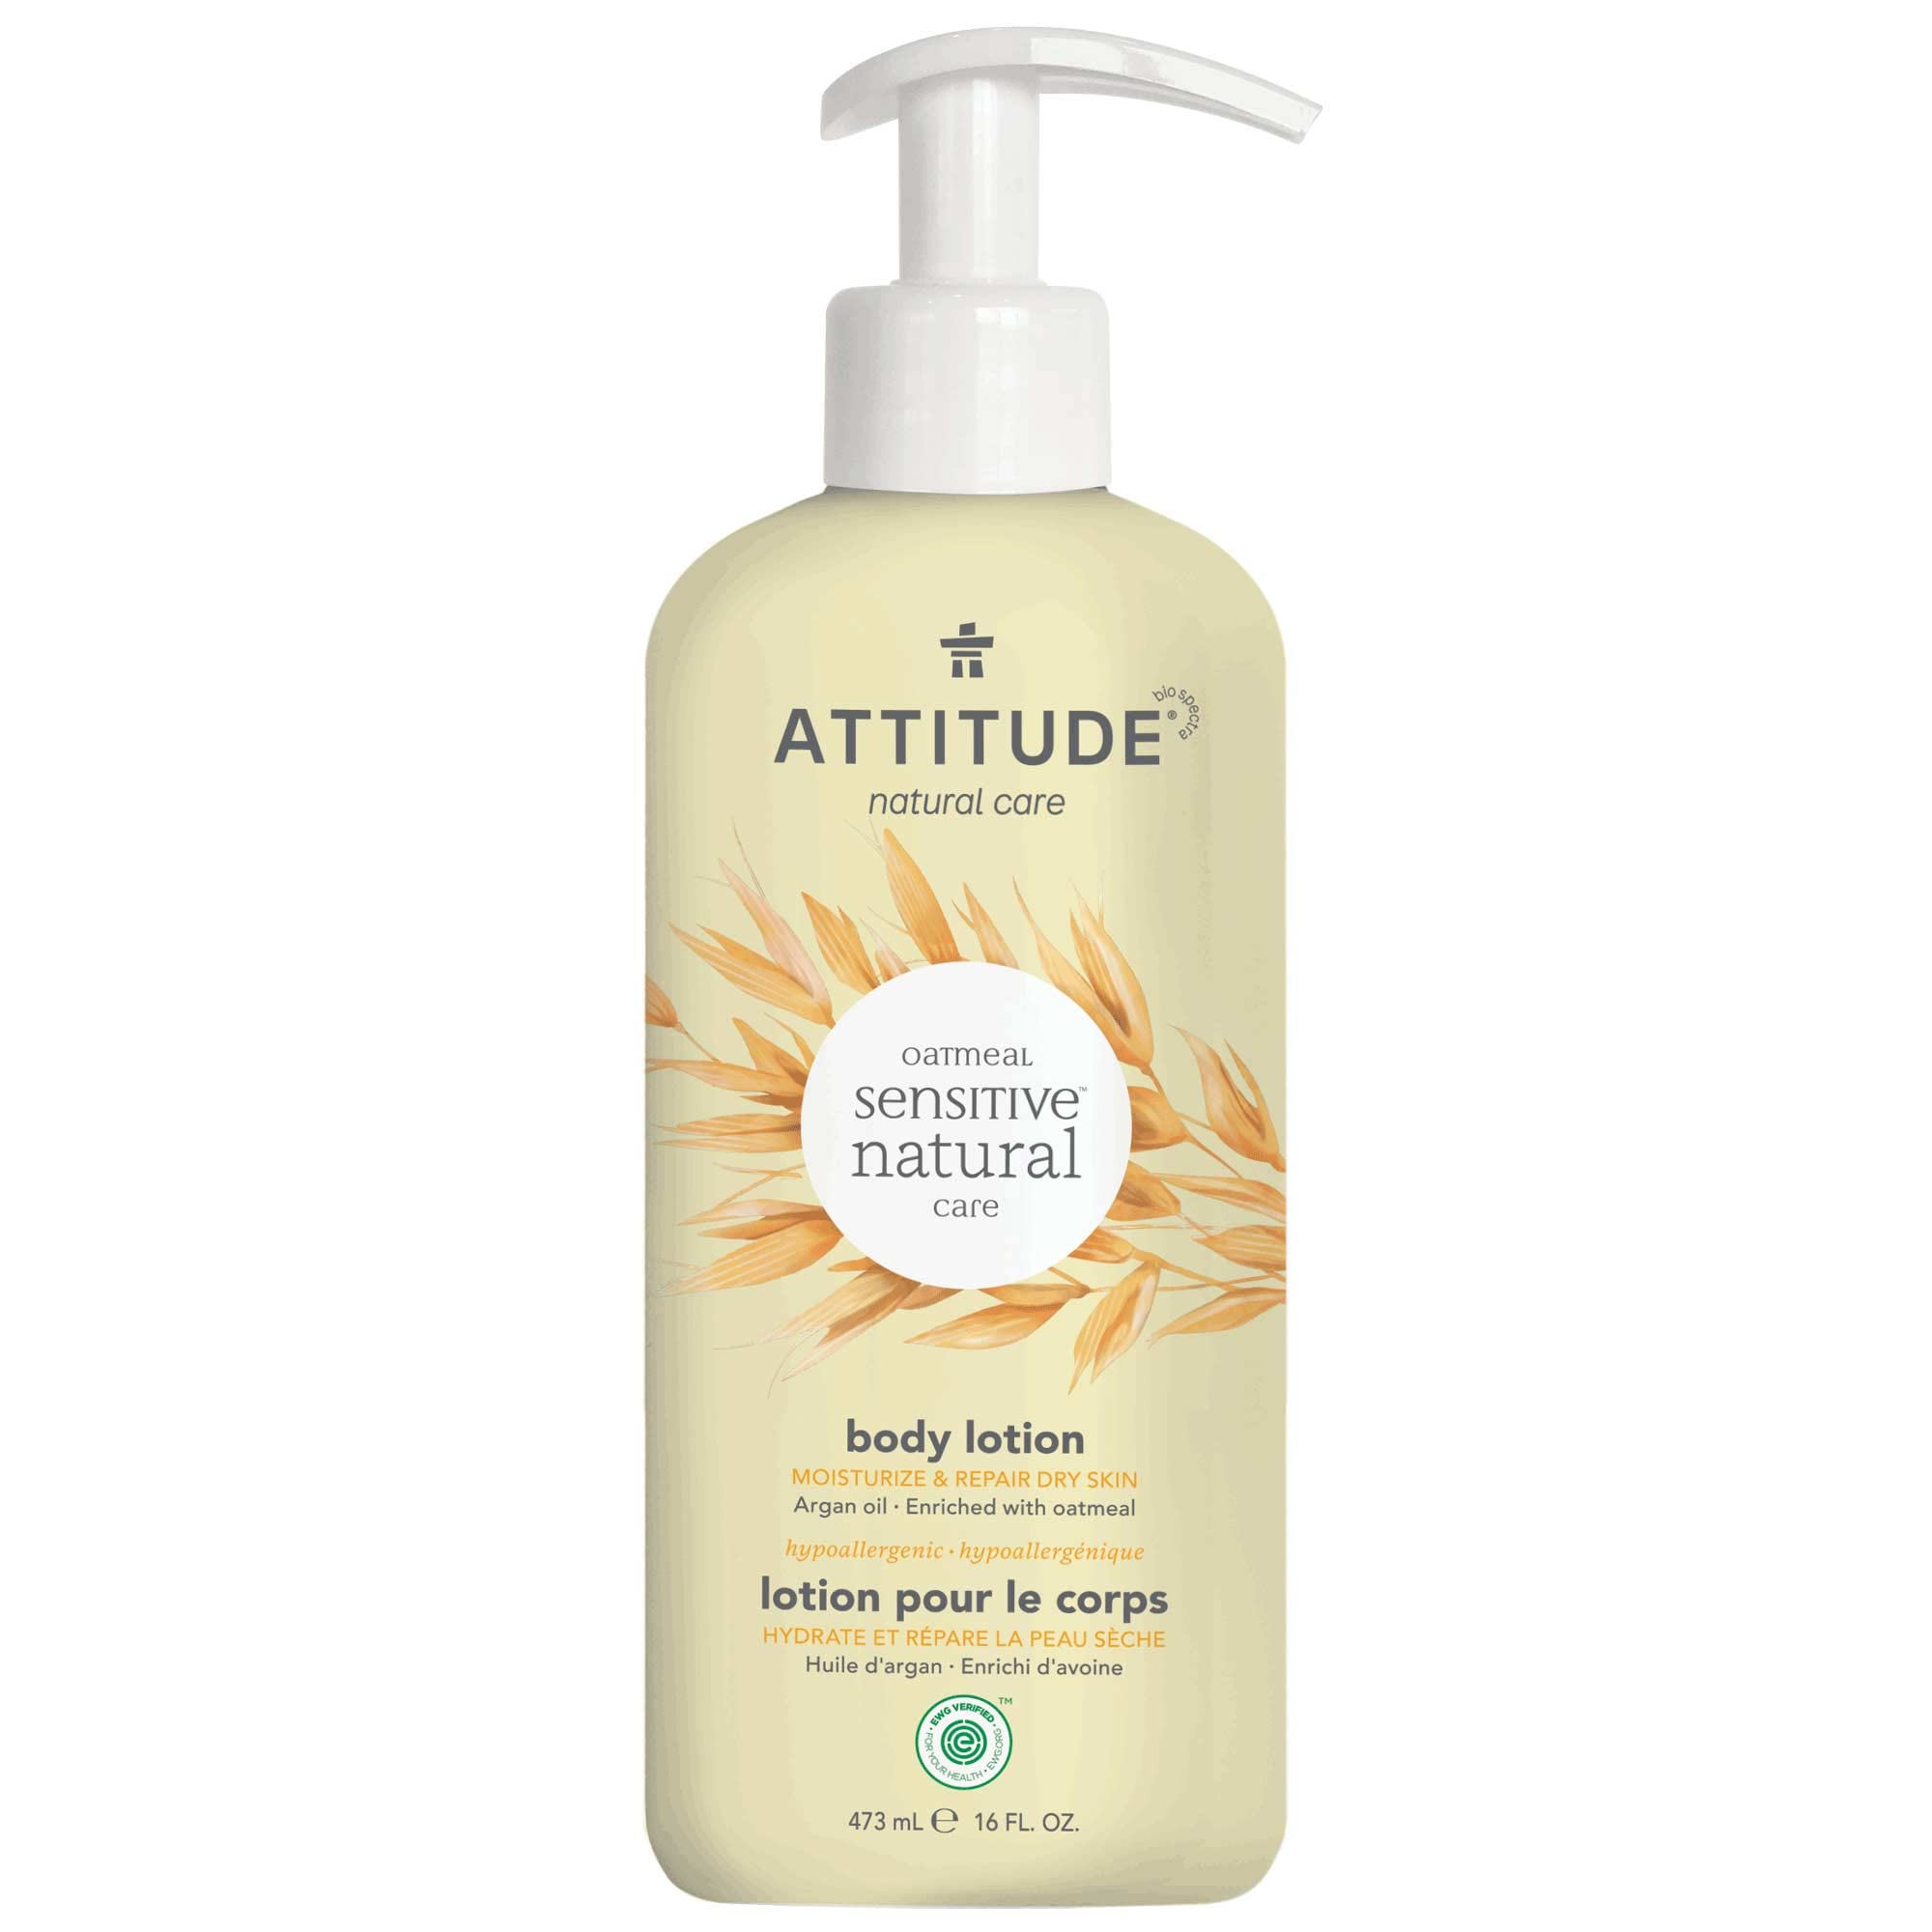 ATTITUDE Moisturizing Body Lotion for Sensitive Skin Enriched with Oat and Argan Oil, EWG Verified, Hypoallergenic, Vegan and Cruelty-free, 16 Fl Oz